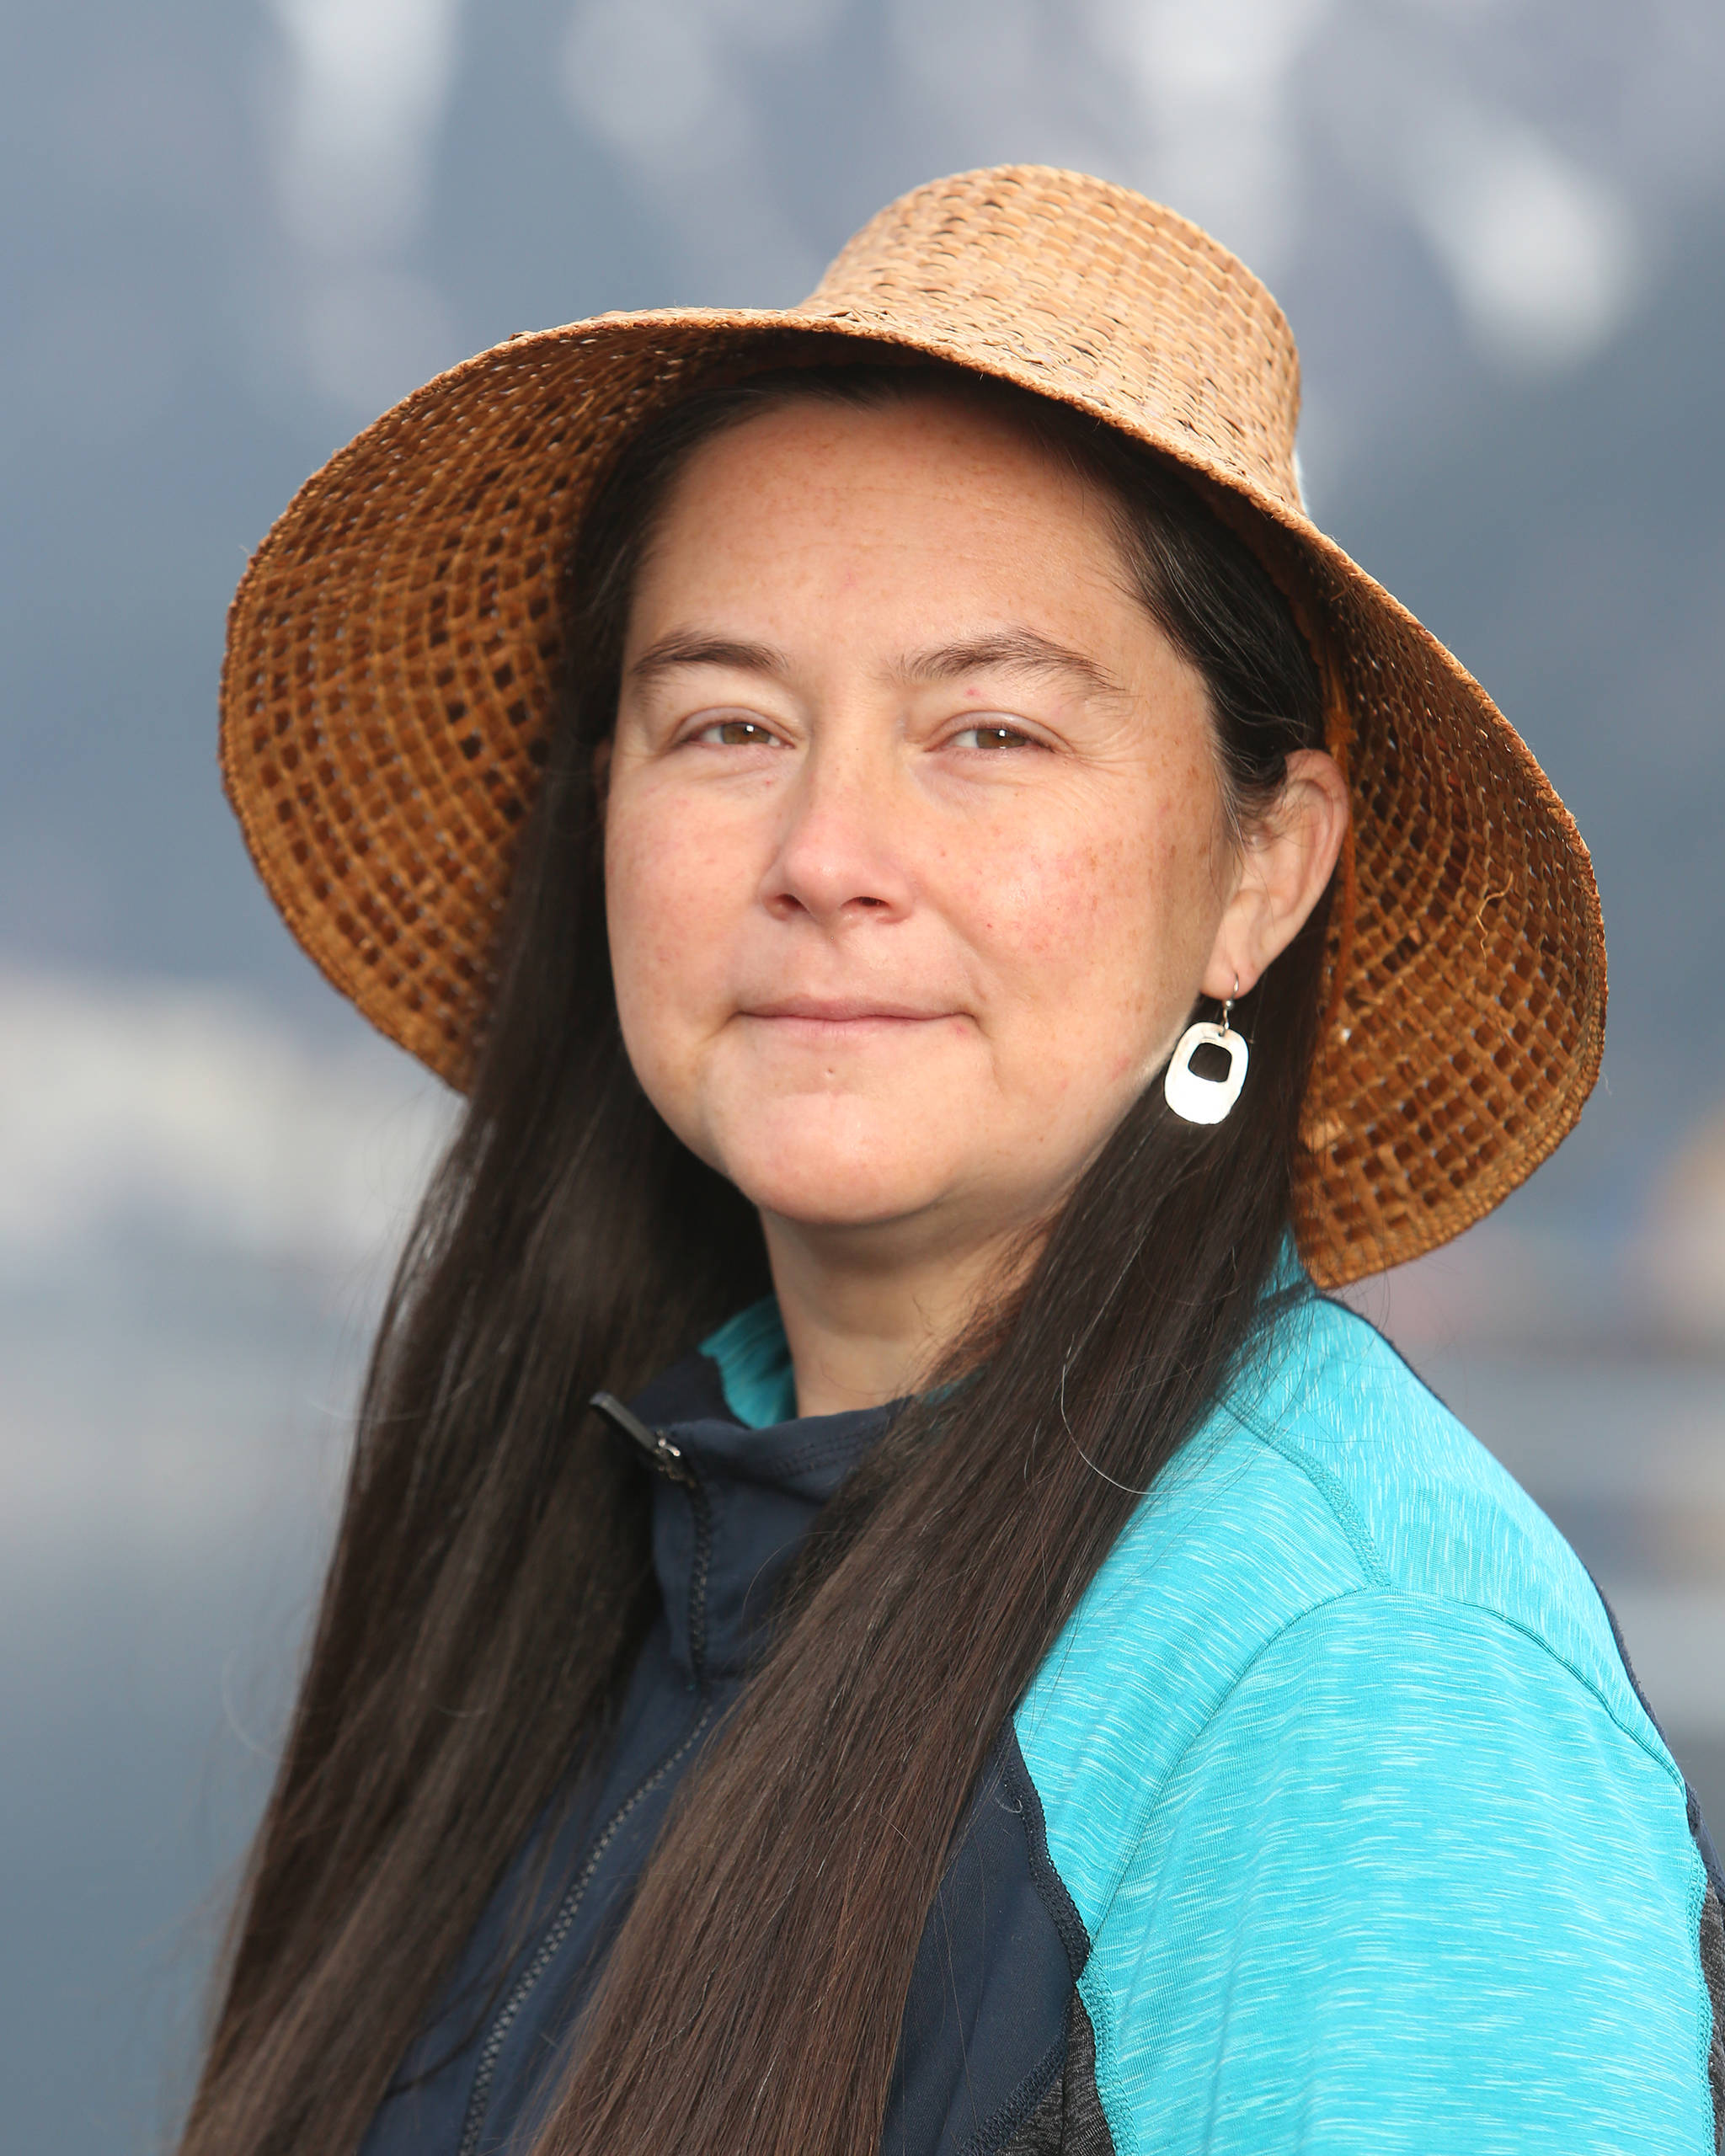 Vivian Mork Yéilk’ asserts says: “We have access to good, healthy foods here in Southeast Alaska. We need to tend to what we already have, while also working to grow more.”(Courtesy Photo / Brian Wallace for Juneau’s Climate Change Solutionists)